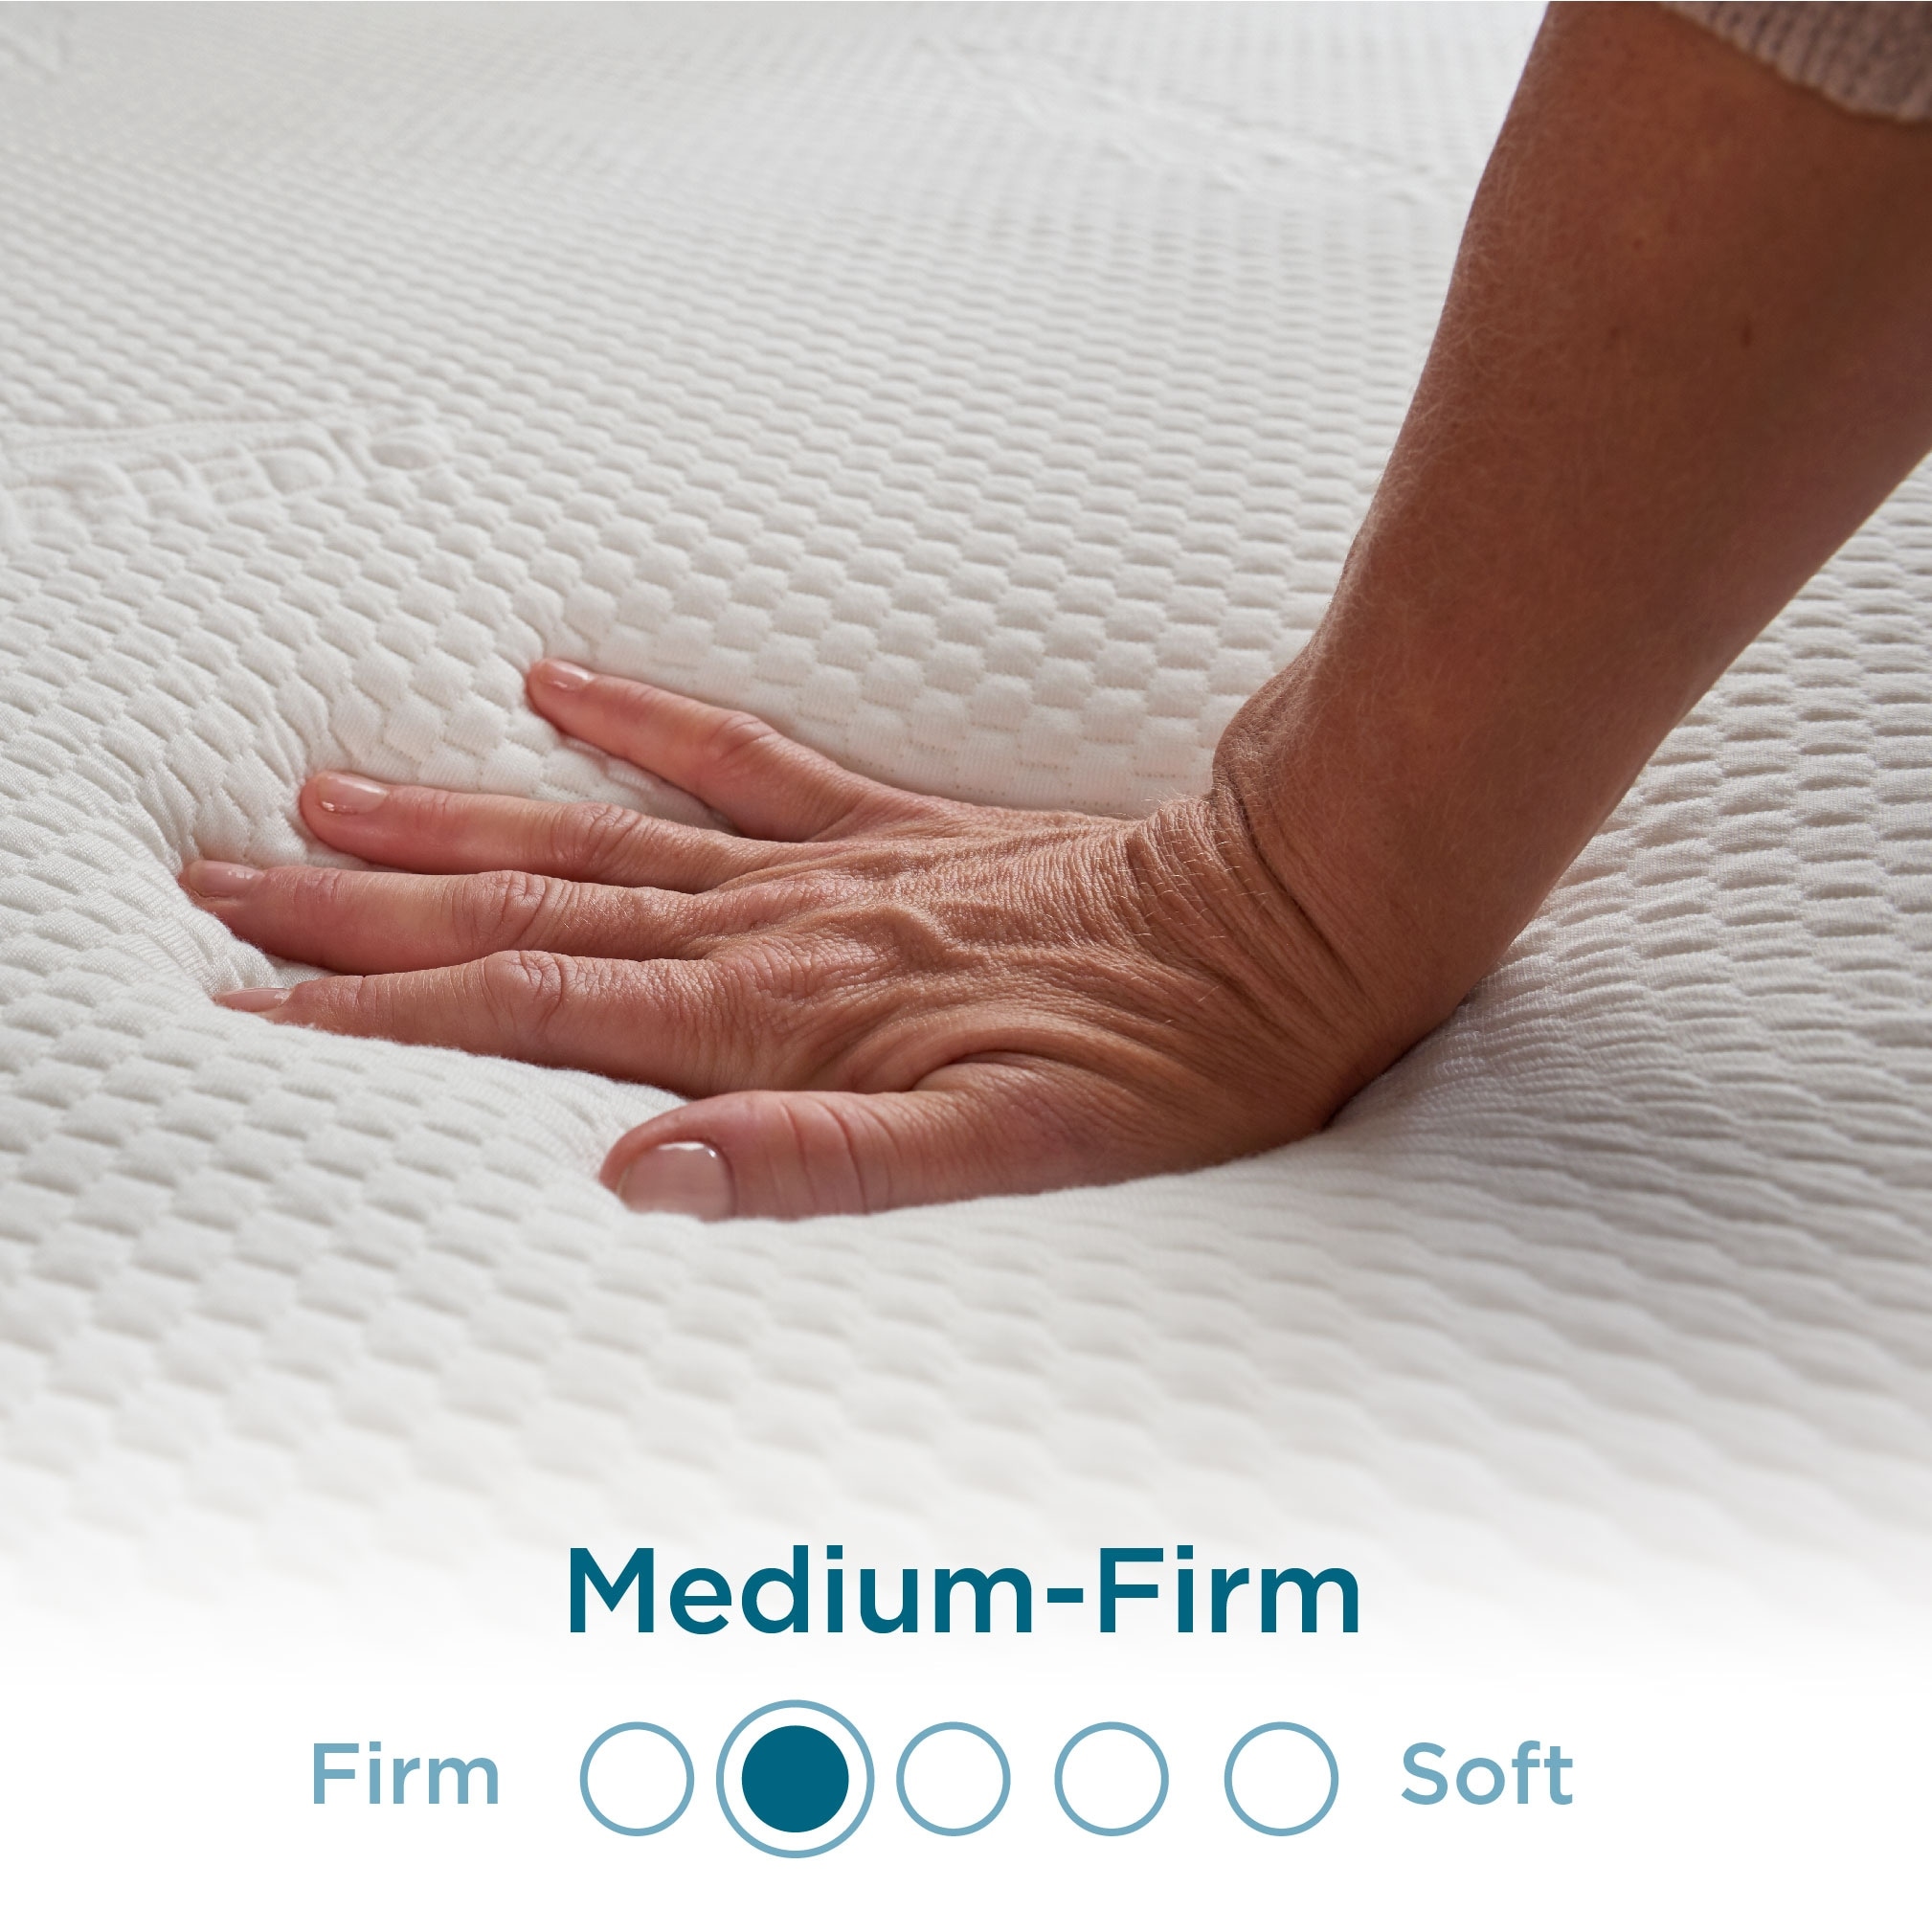 California Design Den Mattress Pads Twin size, 3-Zone Cooling, Soft, Non- Slip Quilted Mattress Pad Twin Size